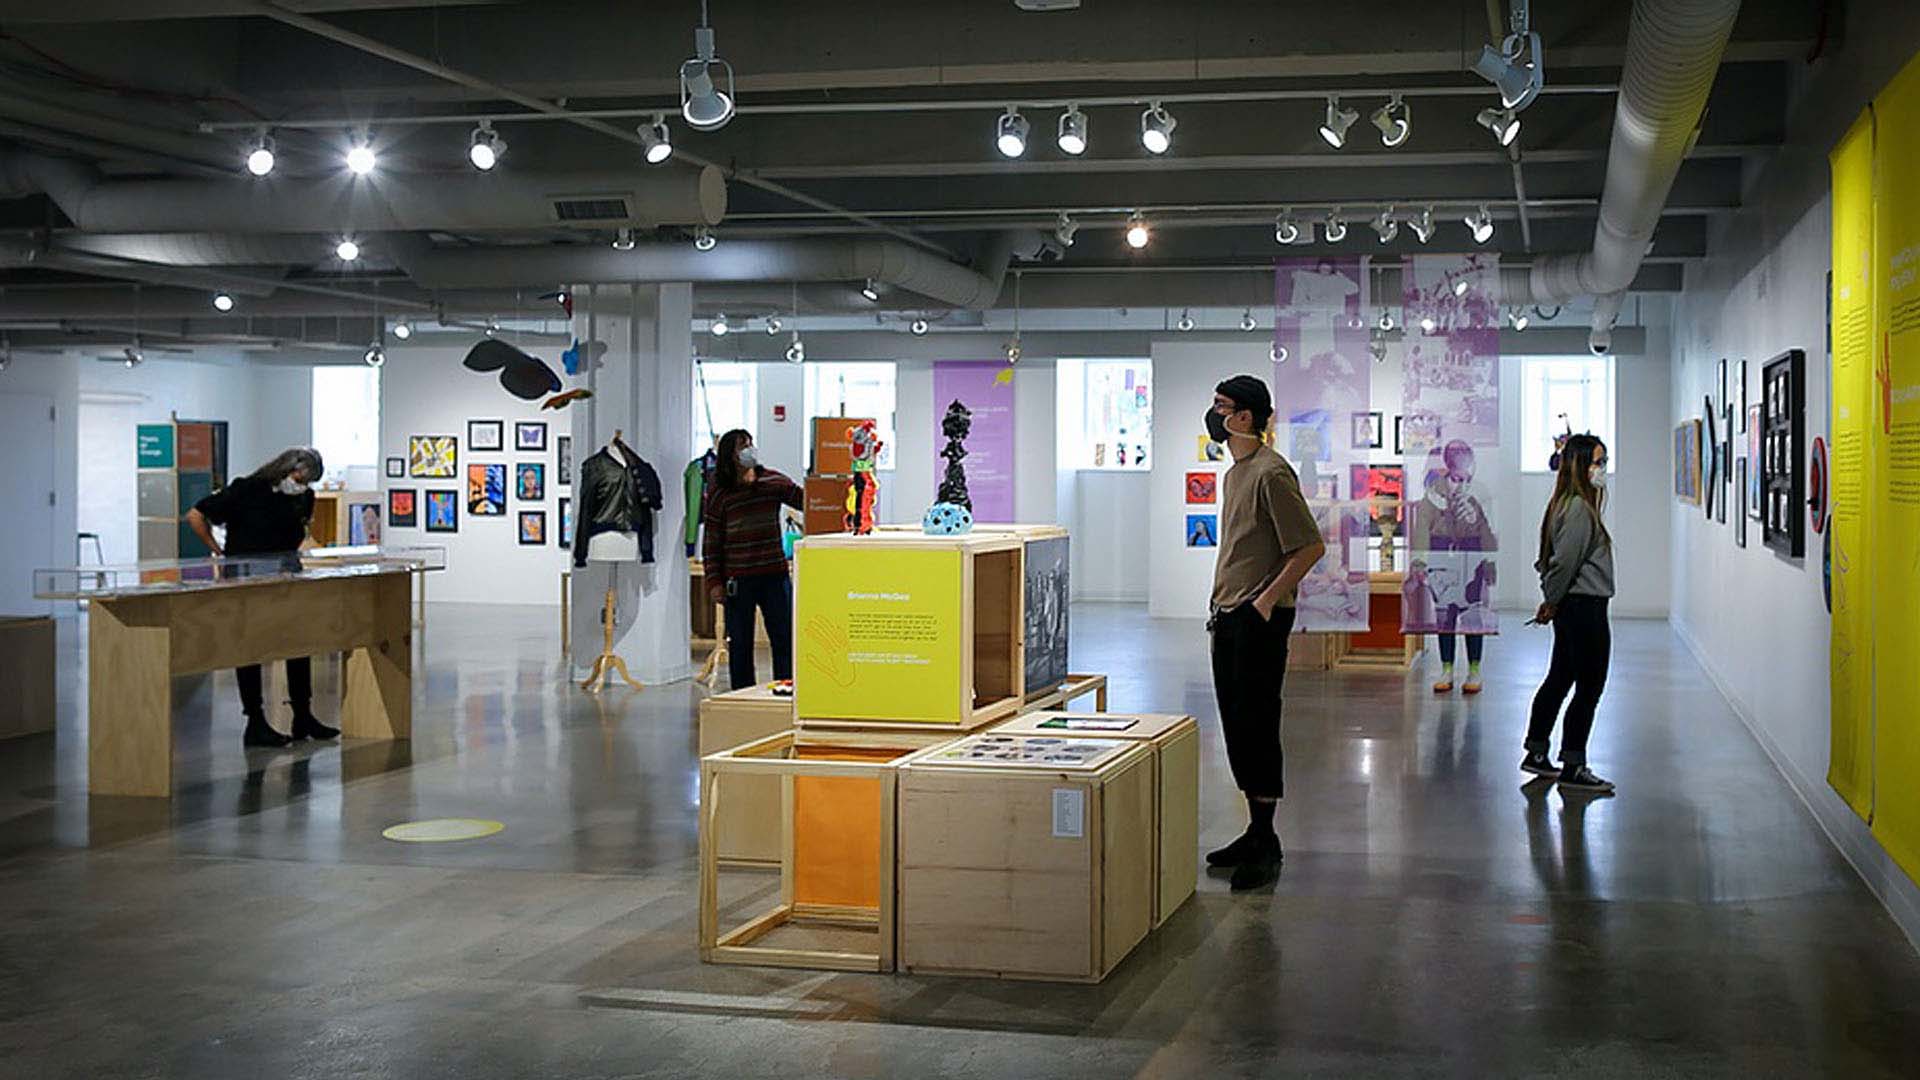 Exhibit designed to celebrate the Community Arts Partnerships 20 anniversary. Photo shows exhibit with several people milling around and looking at various art and information installations, including stacked colored boxes and purple posters.